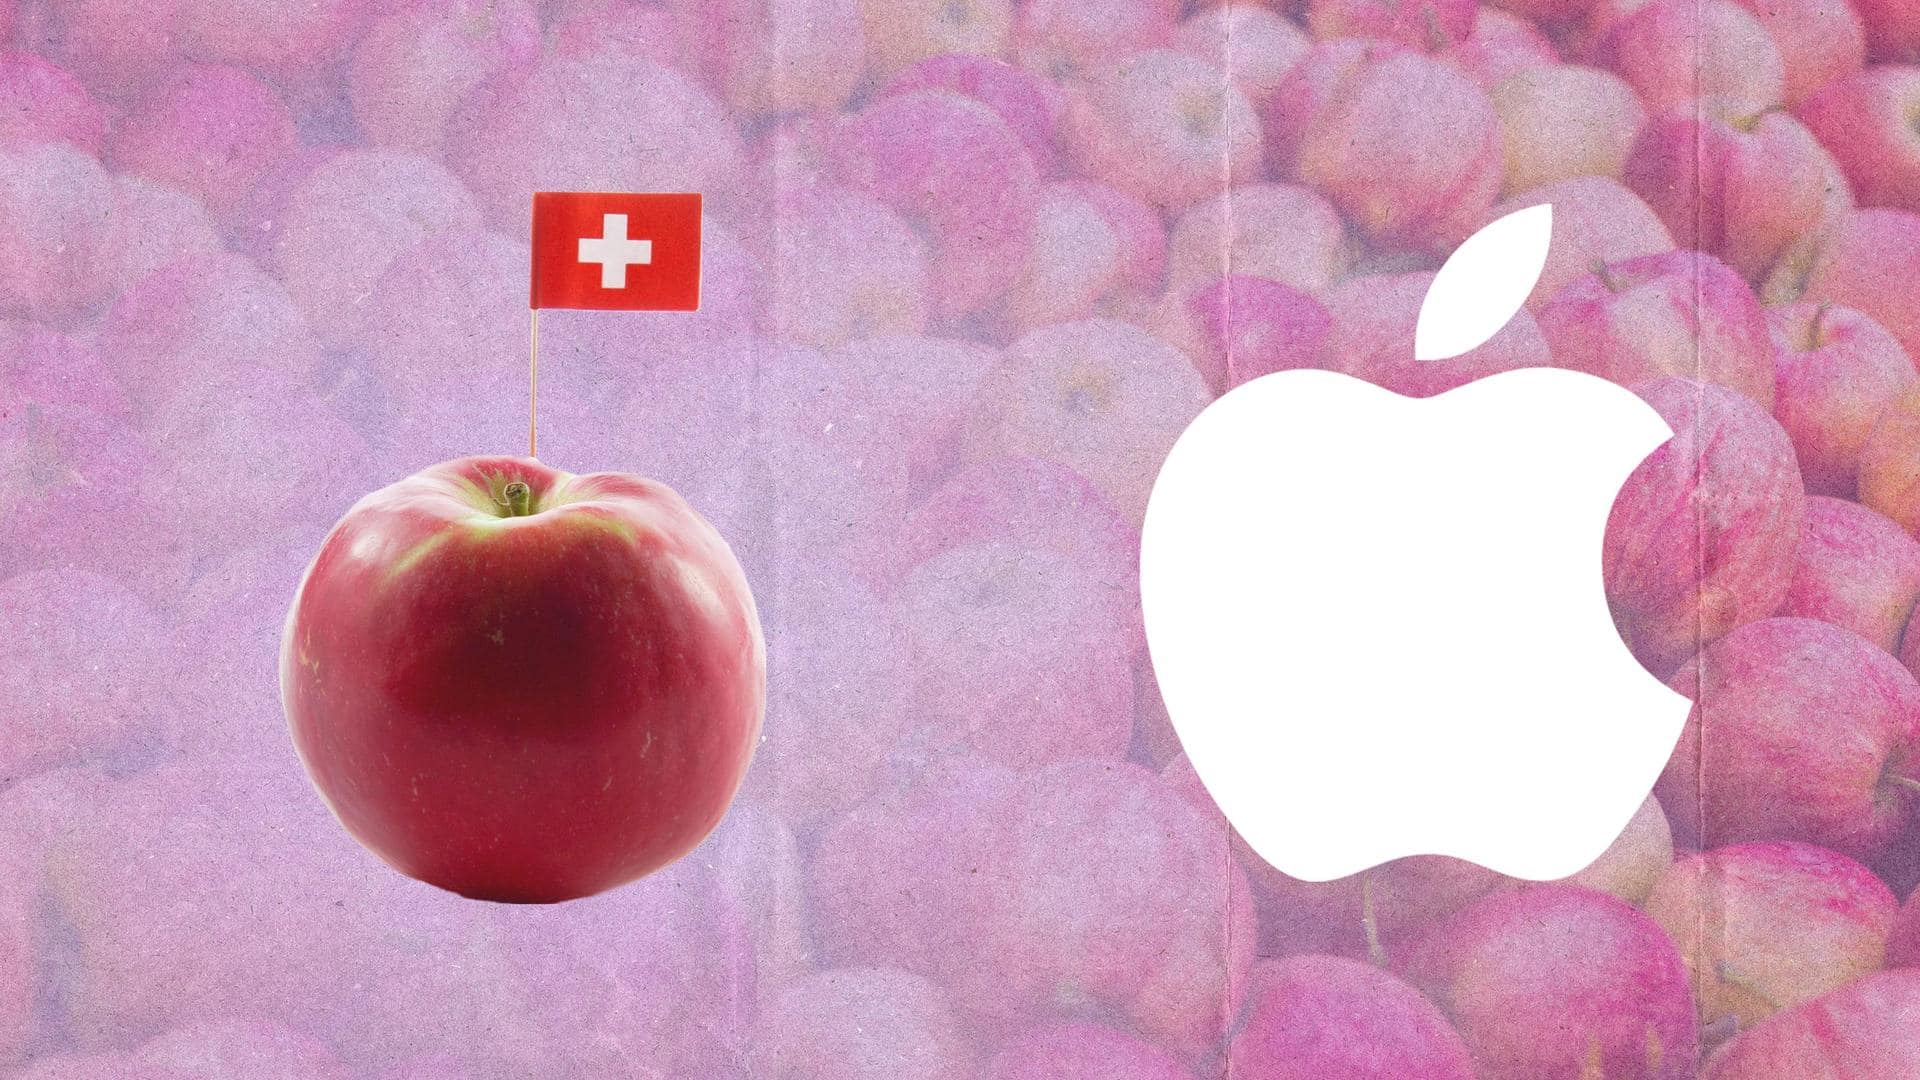 Apple, the tech company, wants to trademark apple, the fruit